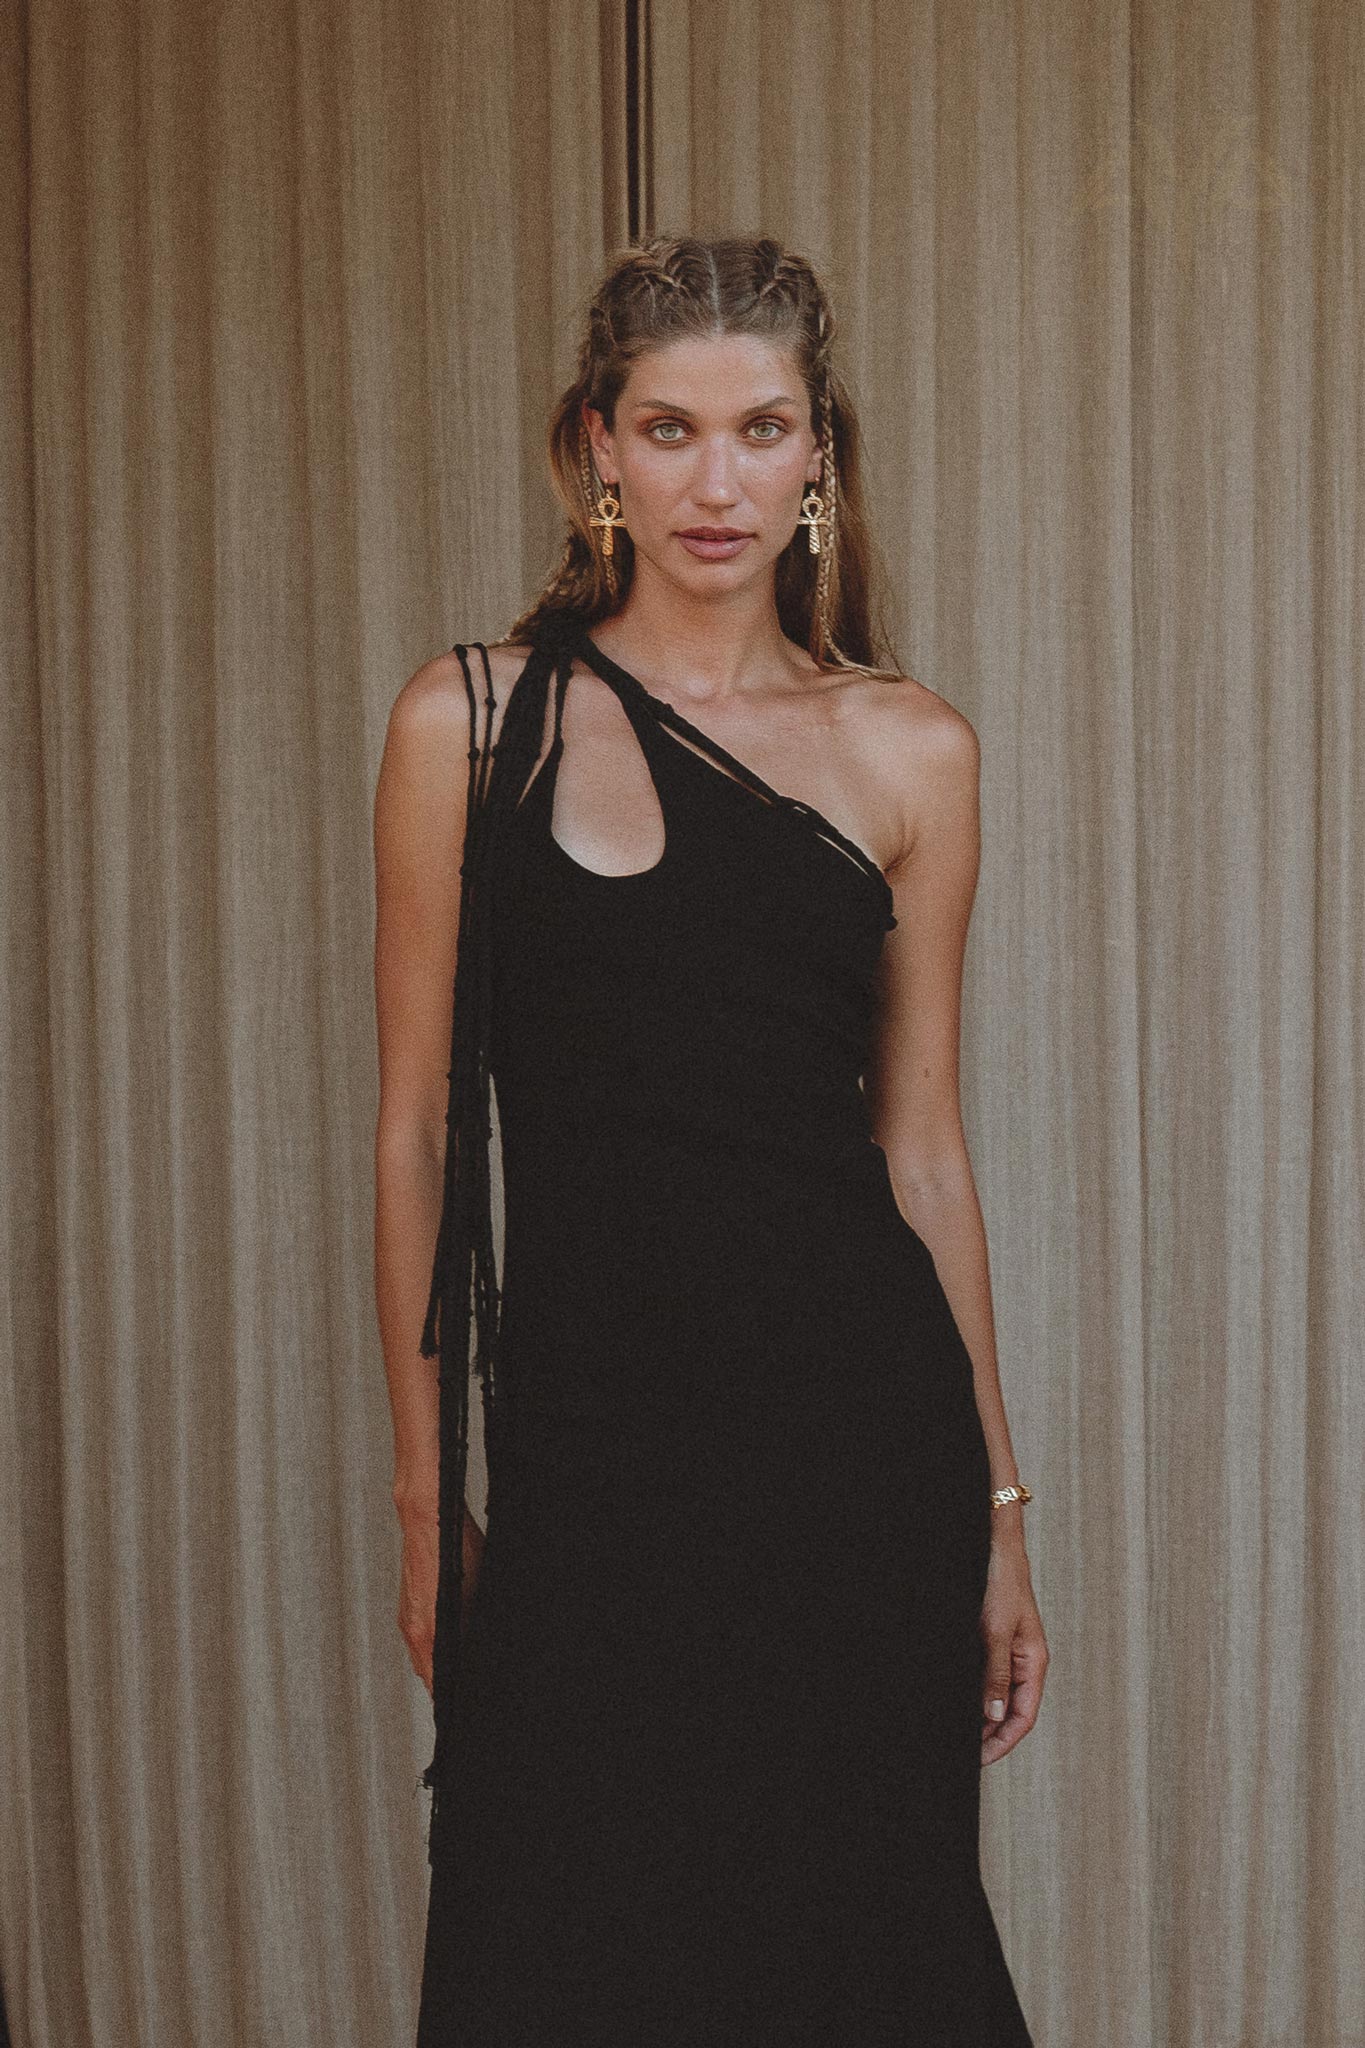 Look Stunning in the Black Open Side Dress by Aya Sacred Wear 